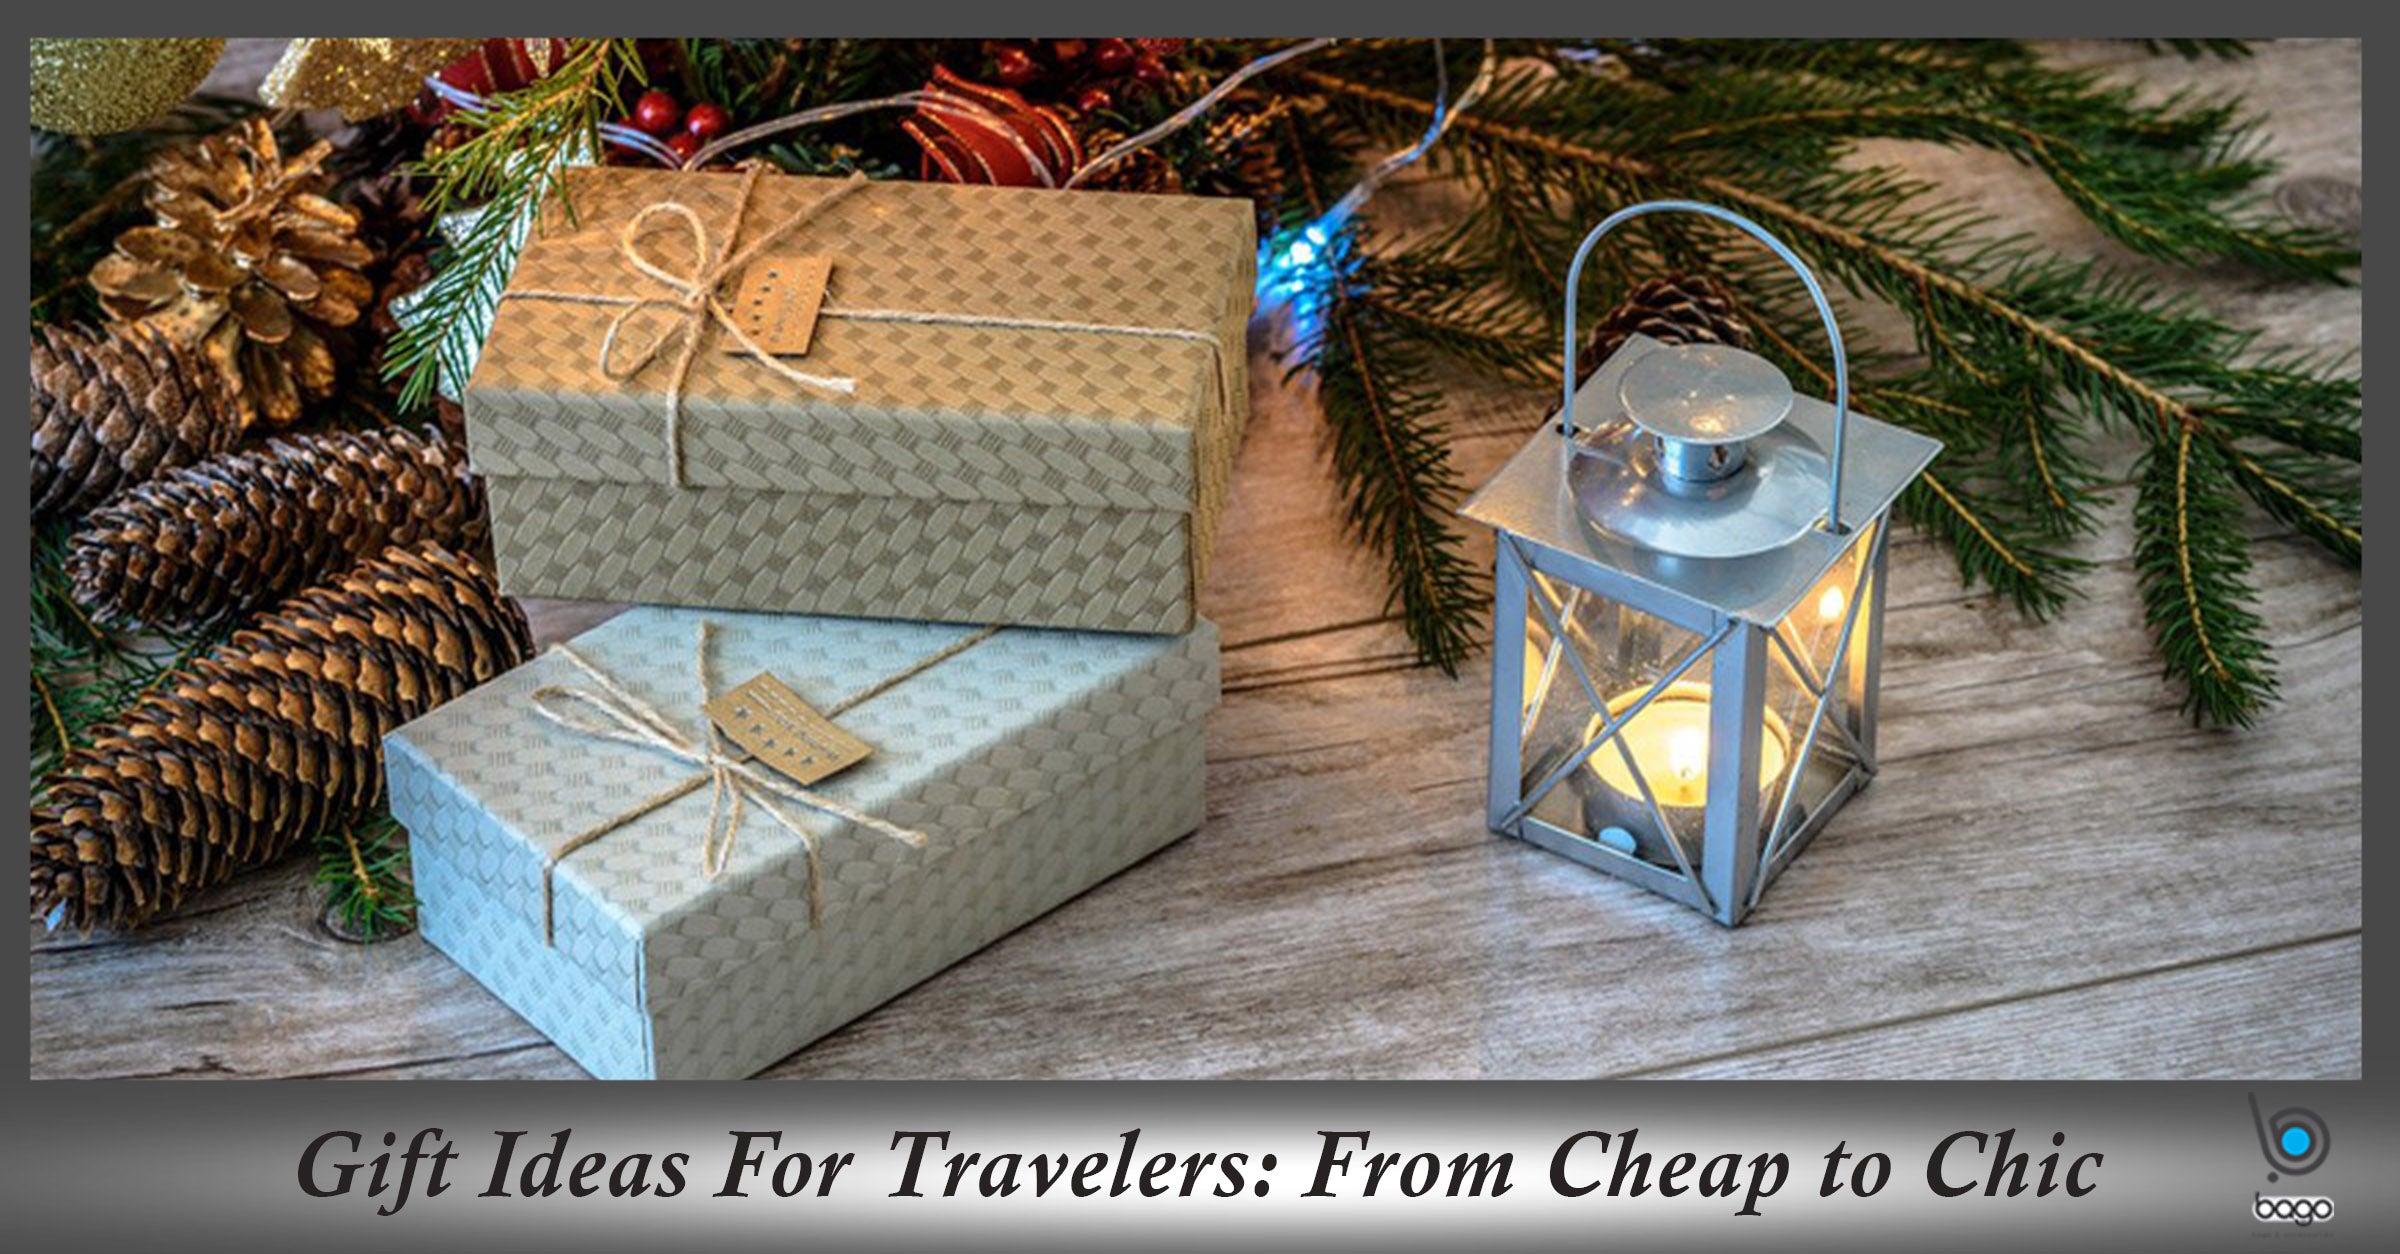 Gift Ideas for Travelers: From Cheap to Chic